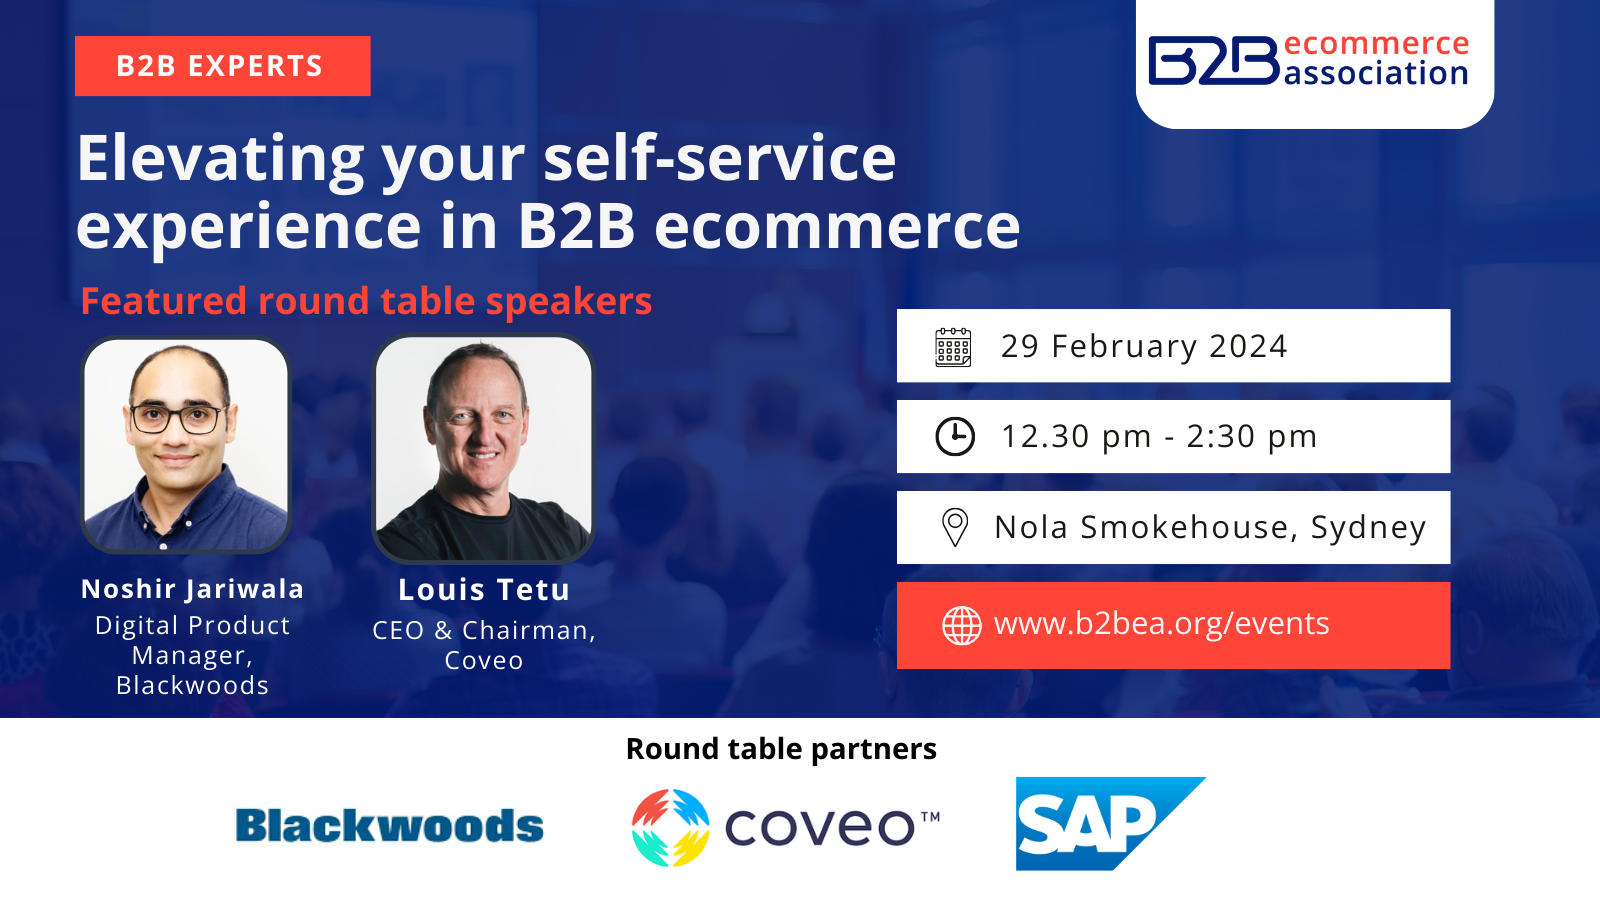 Elevating your self-service experience in B2B ecommerce